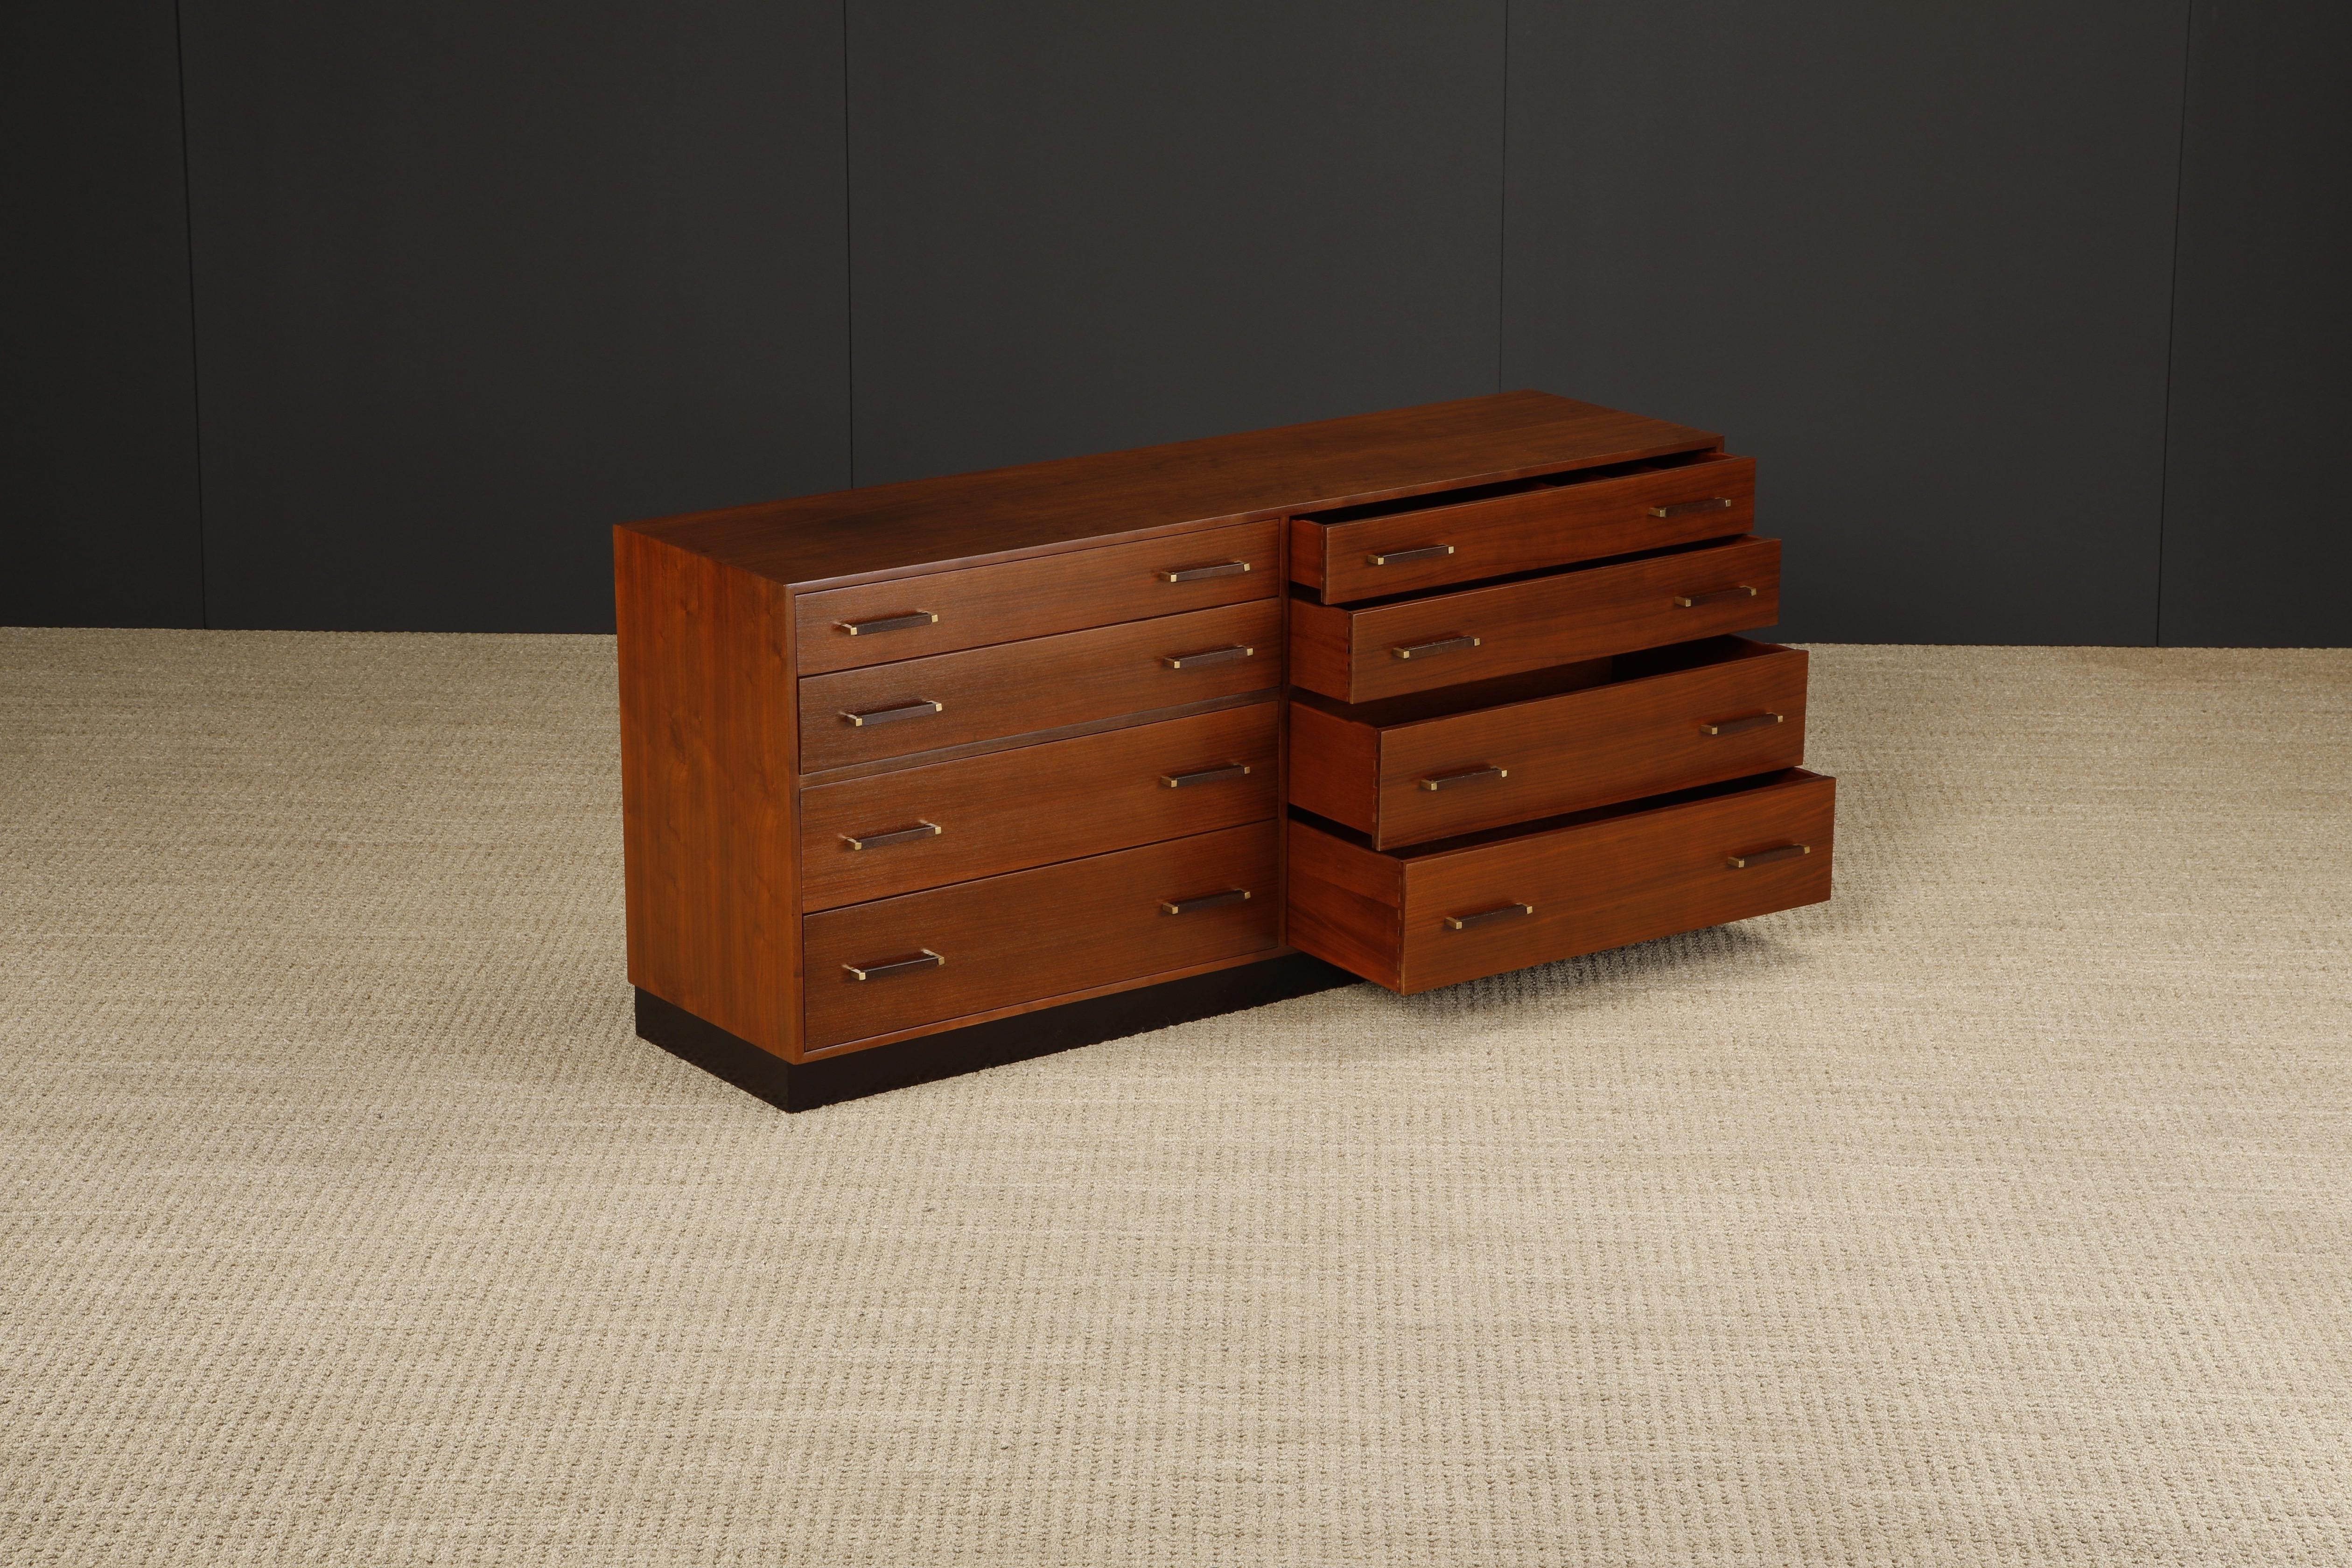 Mid-20th Century Refinished Walnut and Brass Dresser by Edward Wormley for Dunbar, C 1965, Signed